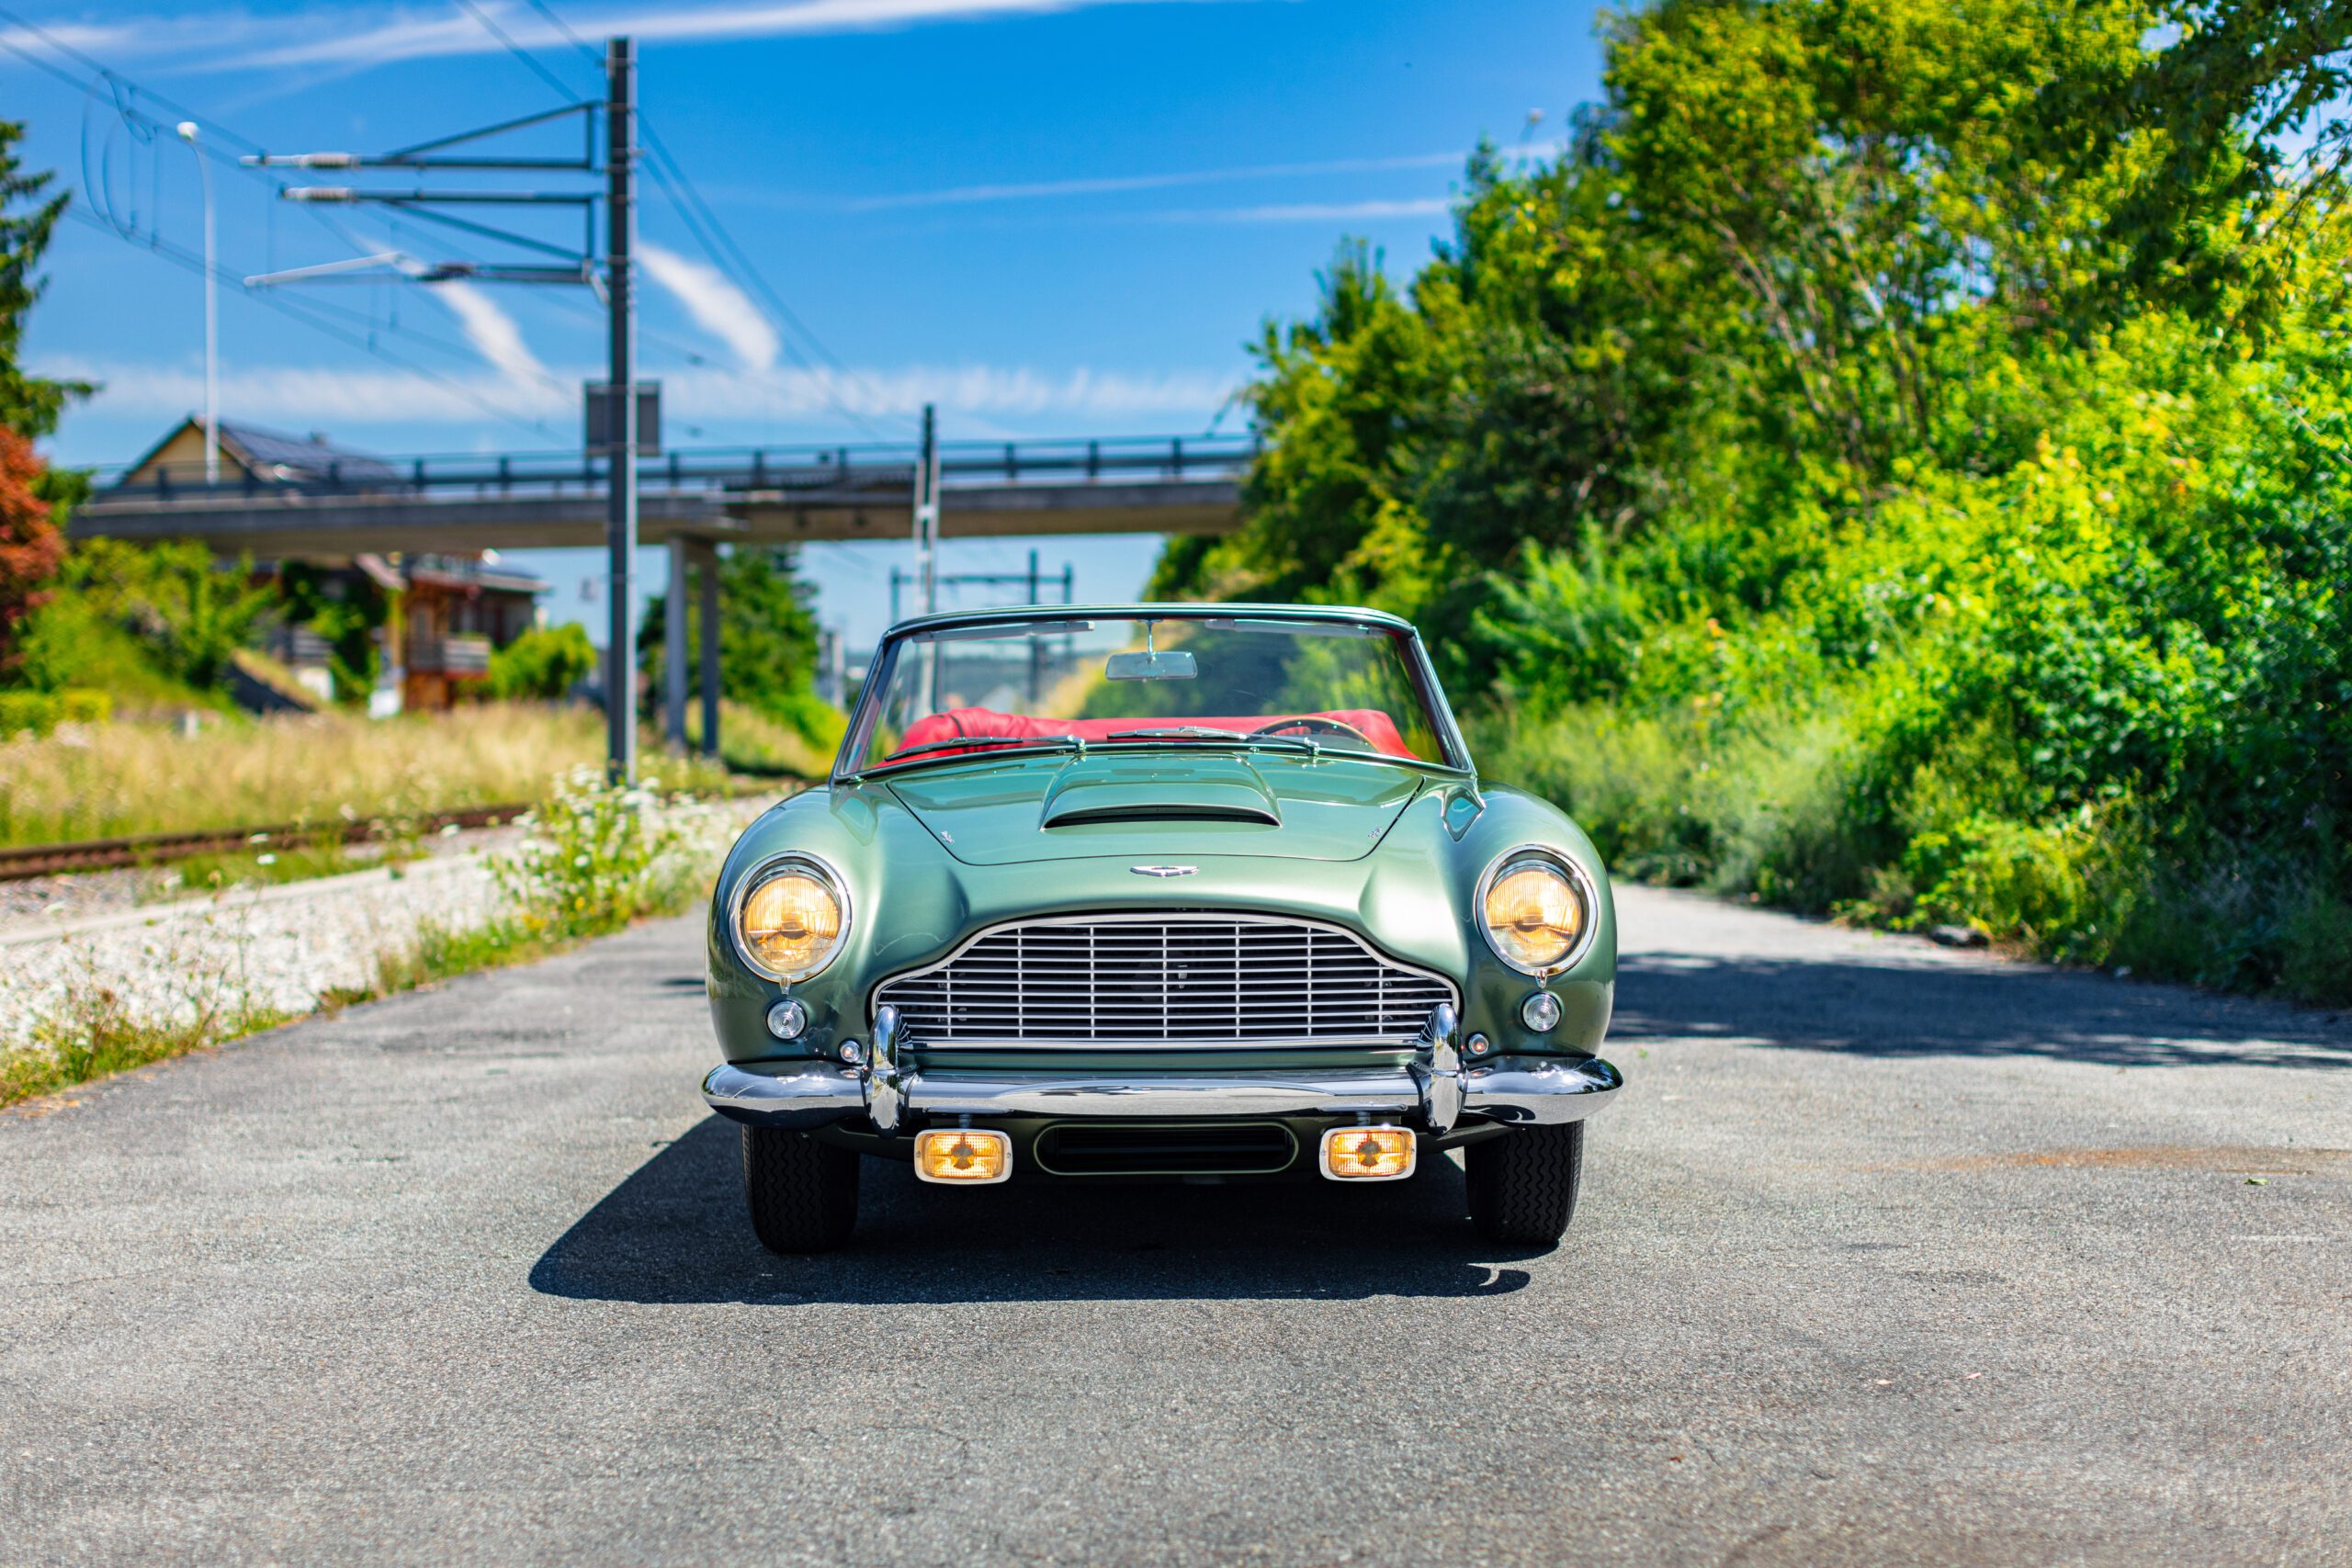 1965 Aston Martin DB5 Convertible Kevin Van Campenhout ©2022 Courtesy of RM Sotheby's